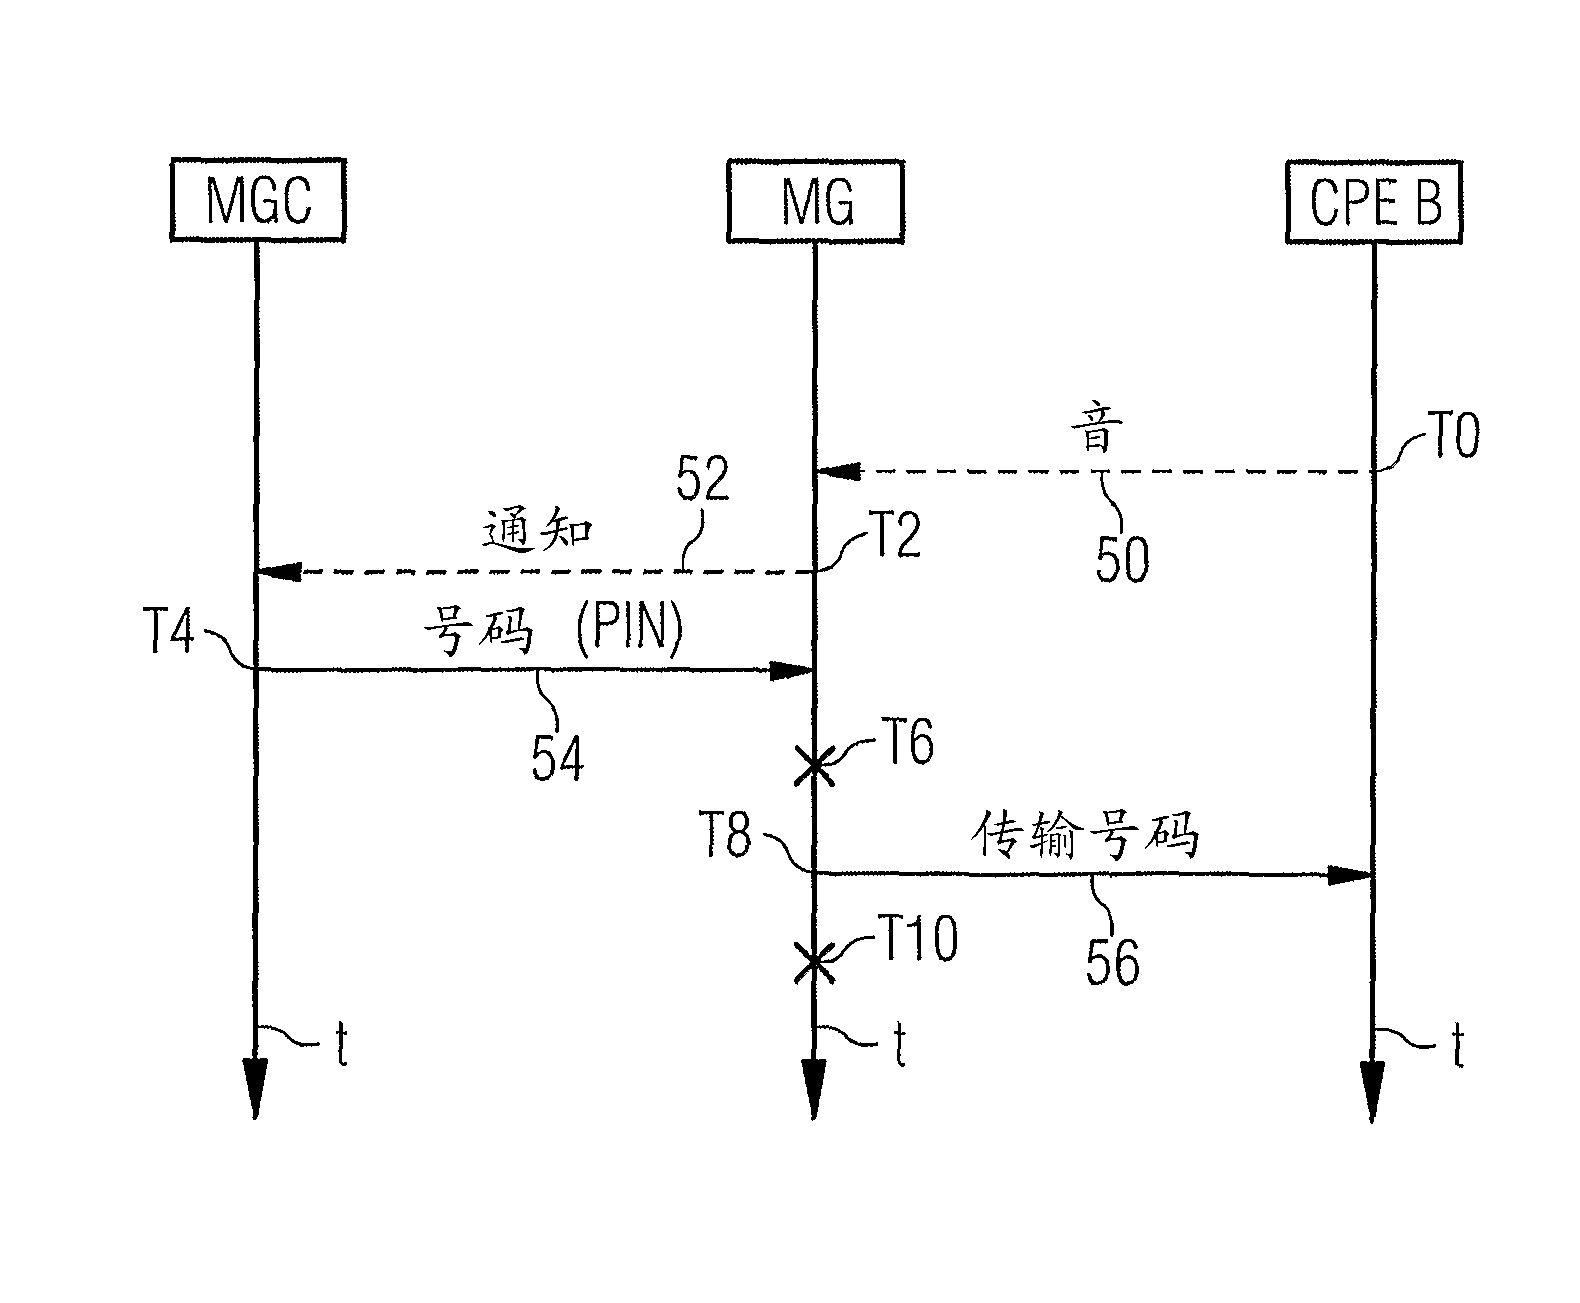 Method for transmitting a caller number, messages, gateway device and gateway control device